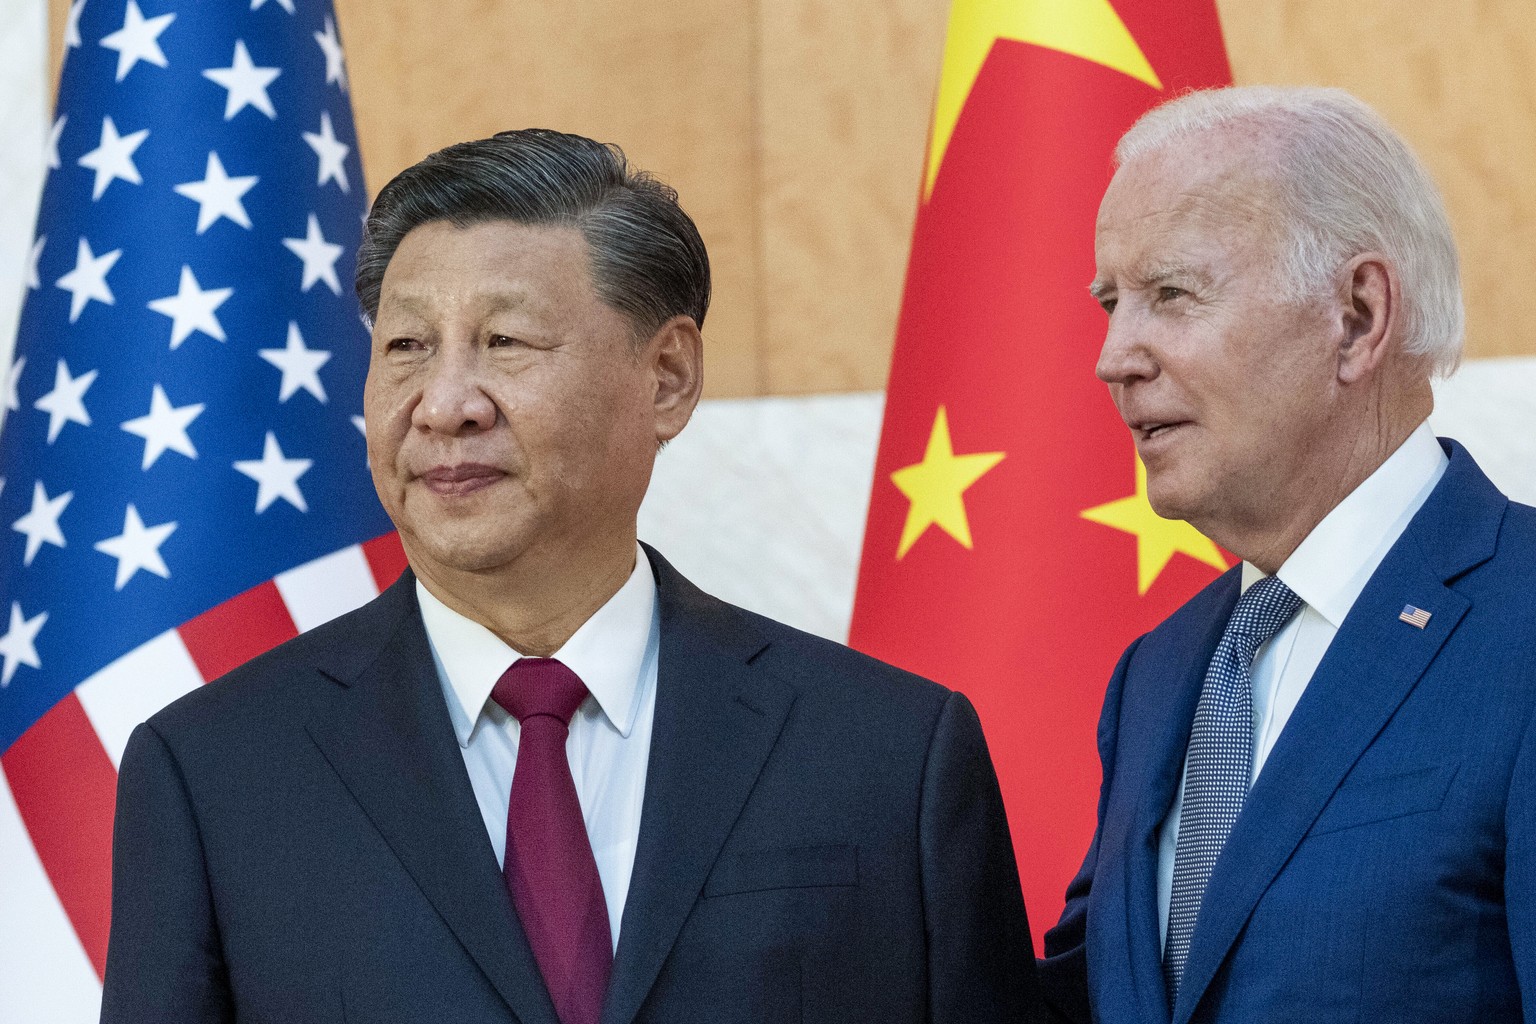 FILE - President Joe Biden, right, stands with Chinese President Xi Jinping before a meeting on the sidelines of the G20 summit meeting, Nov. 14, 2022, in Bali, Indonesia. Ahead of an expected meeting ...